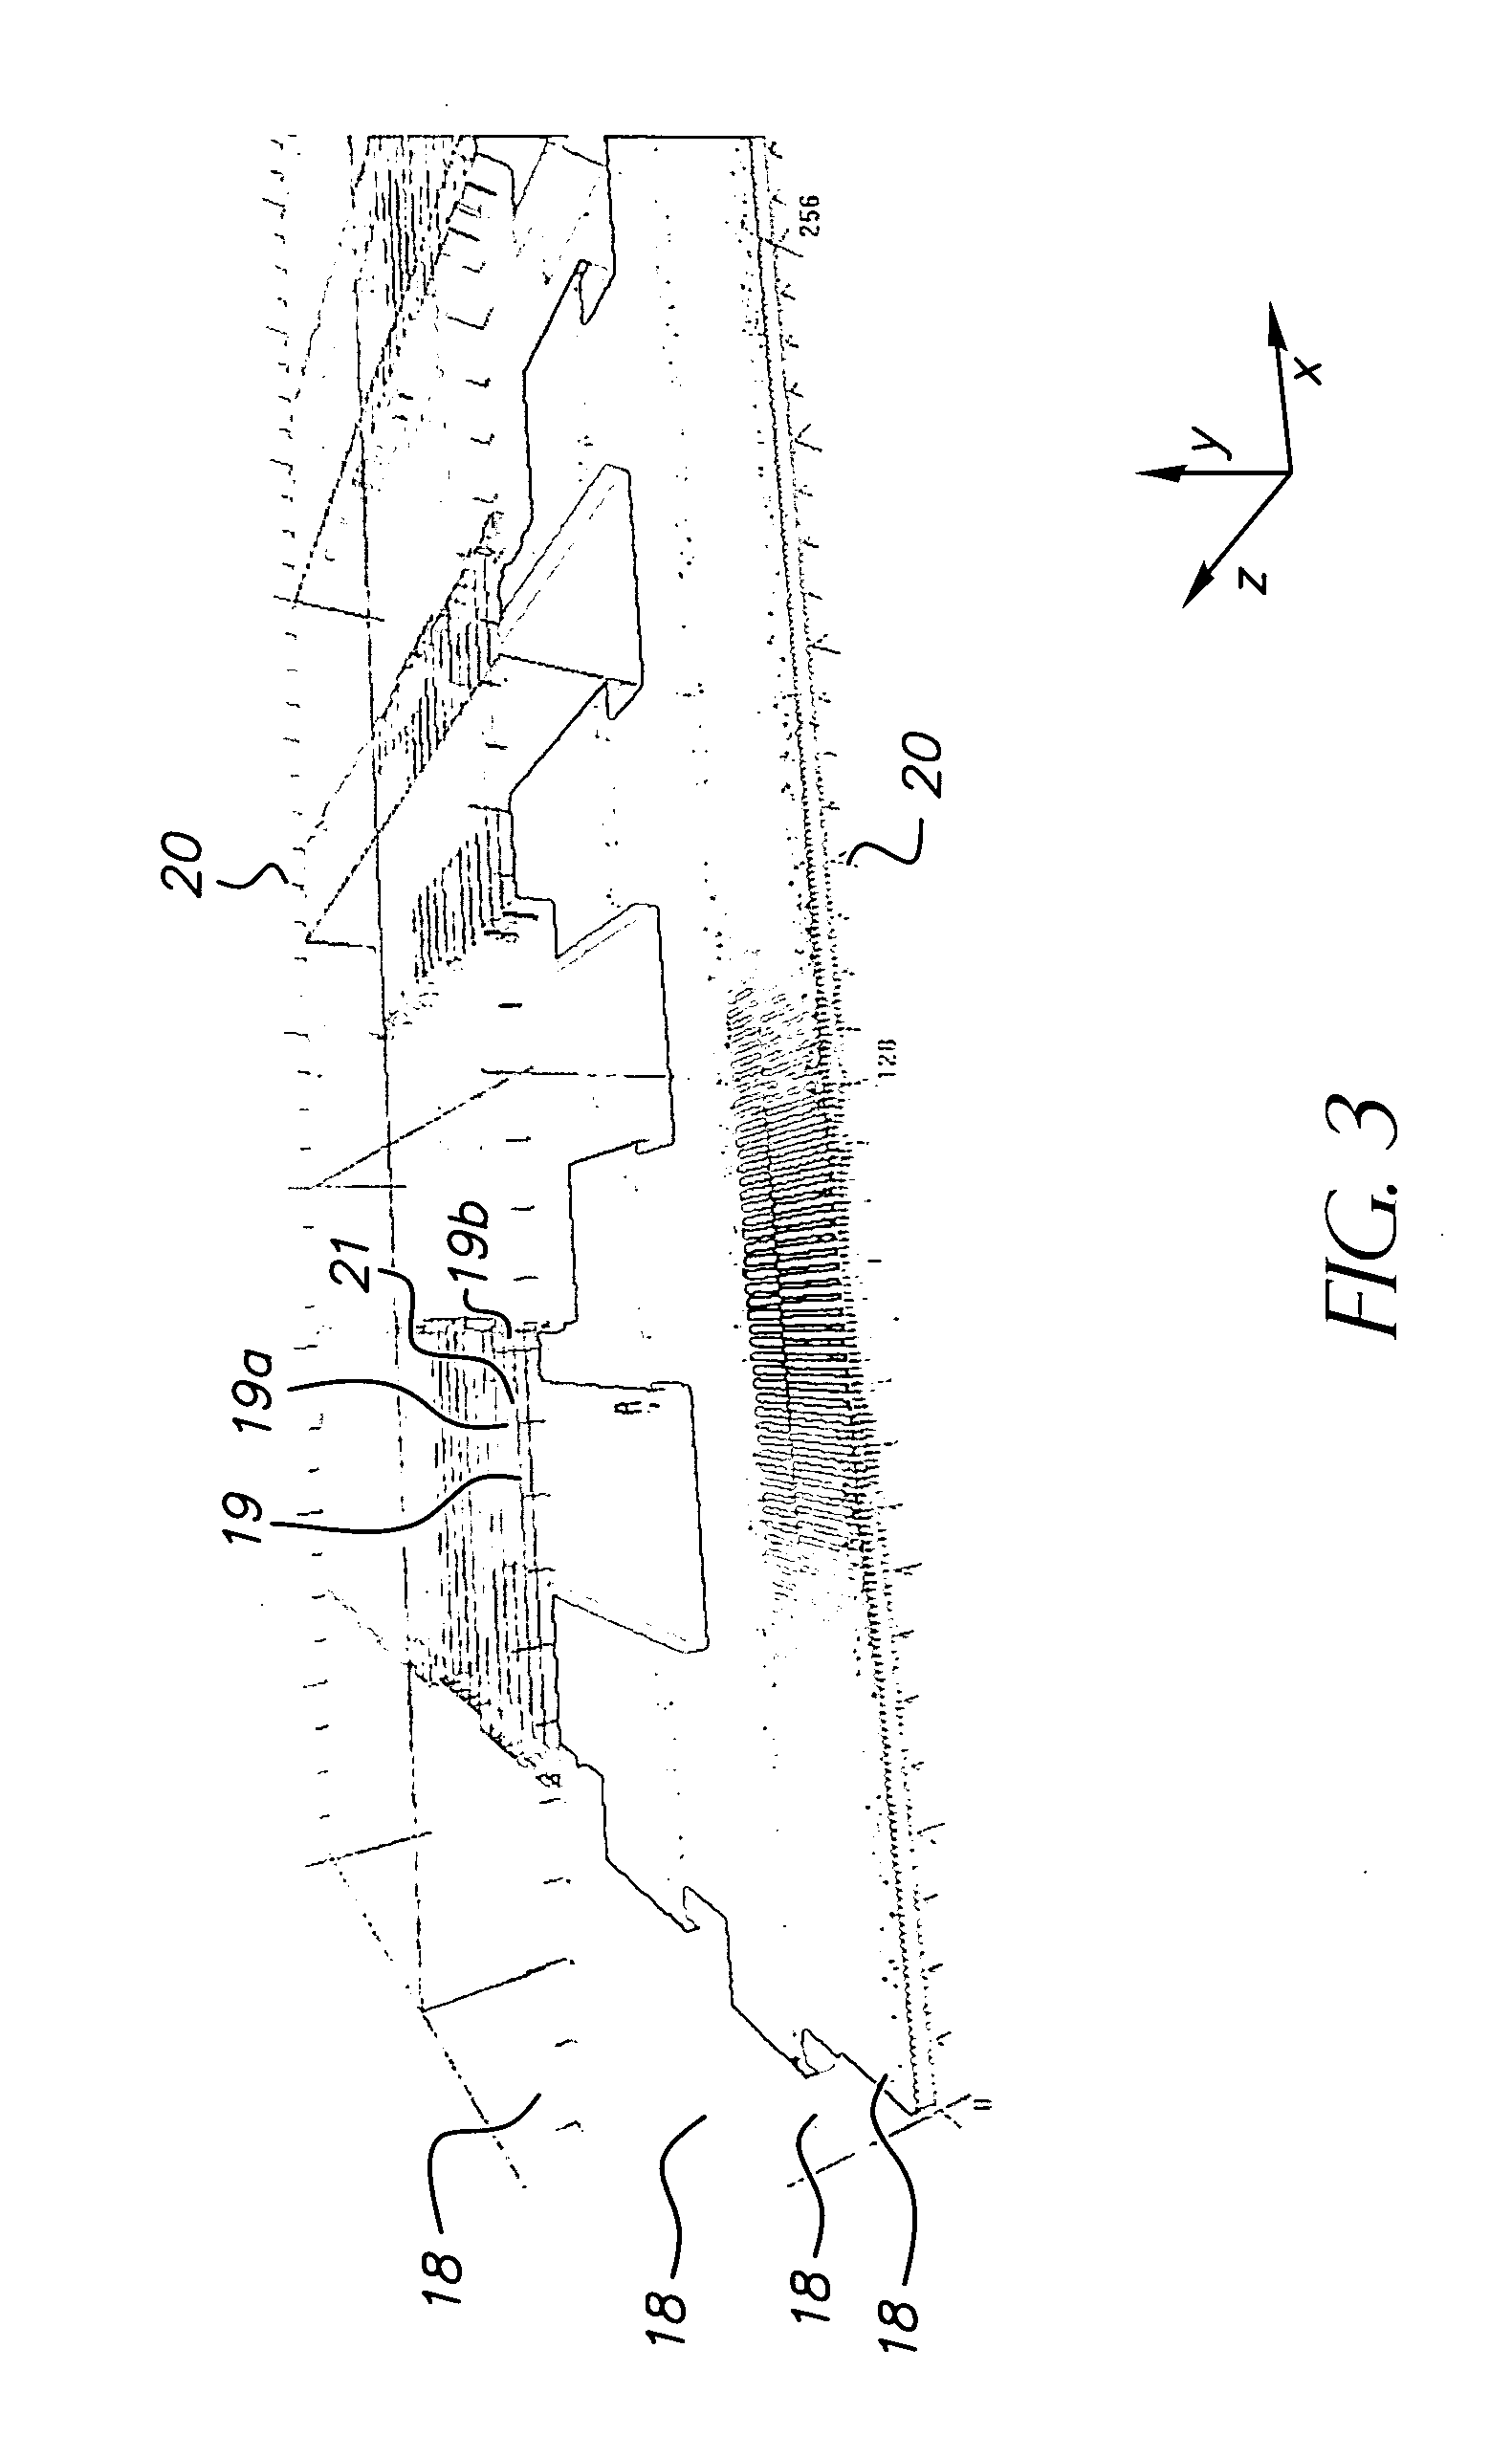 System for three-dimensional rendering of electrical test and measurement signals